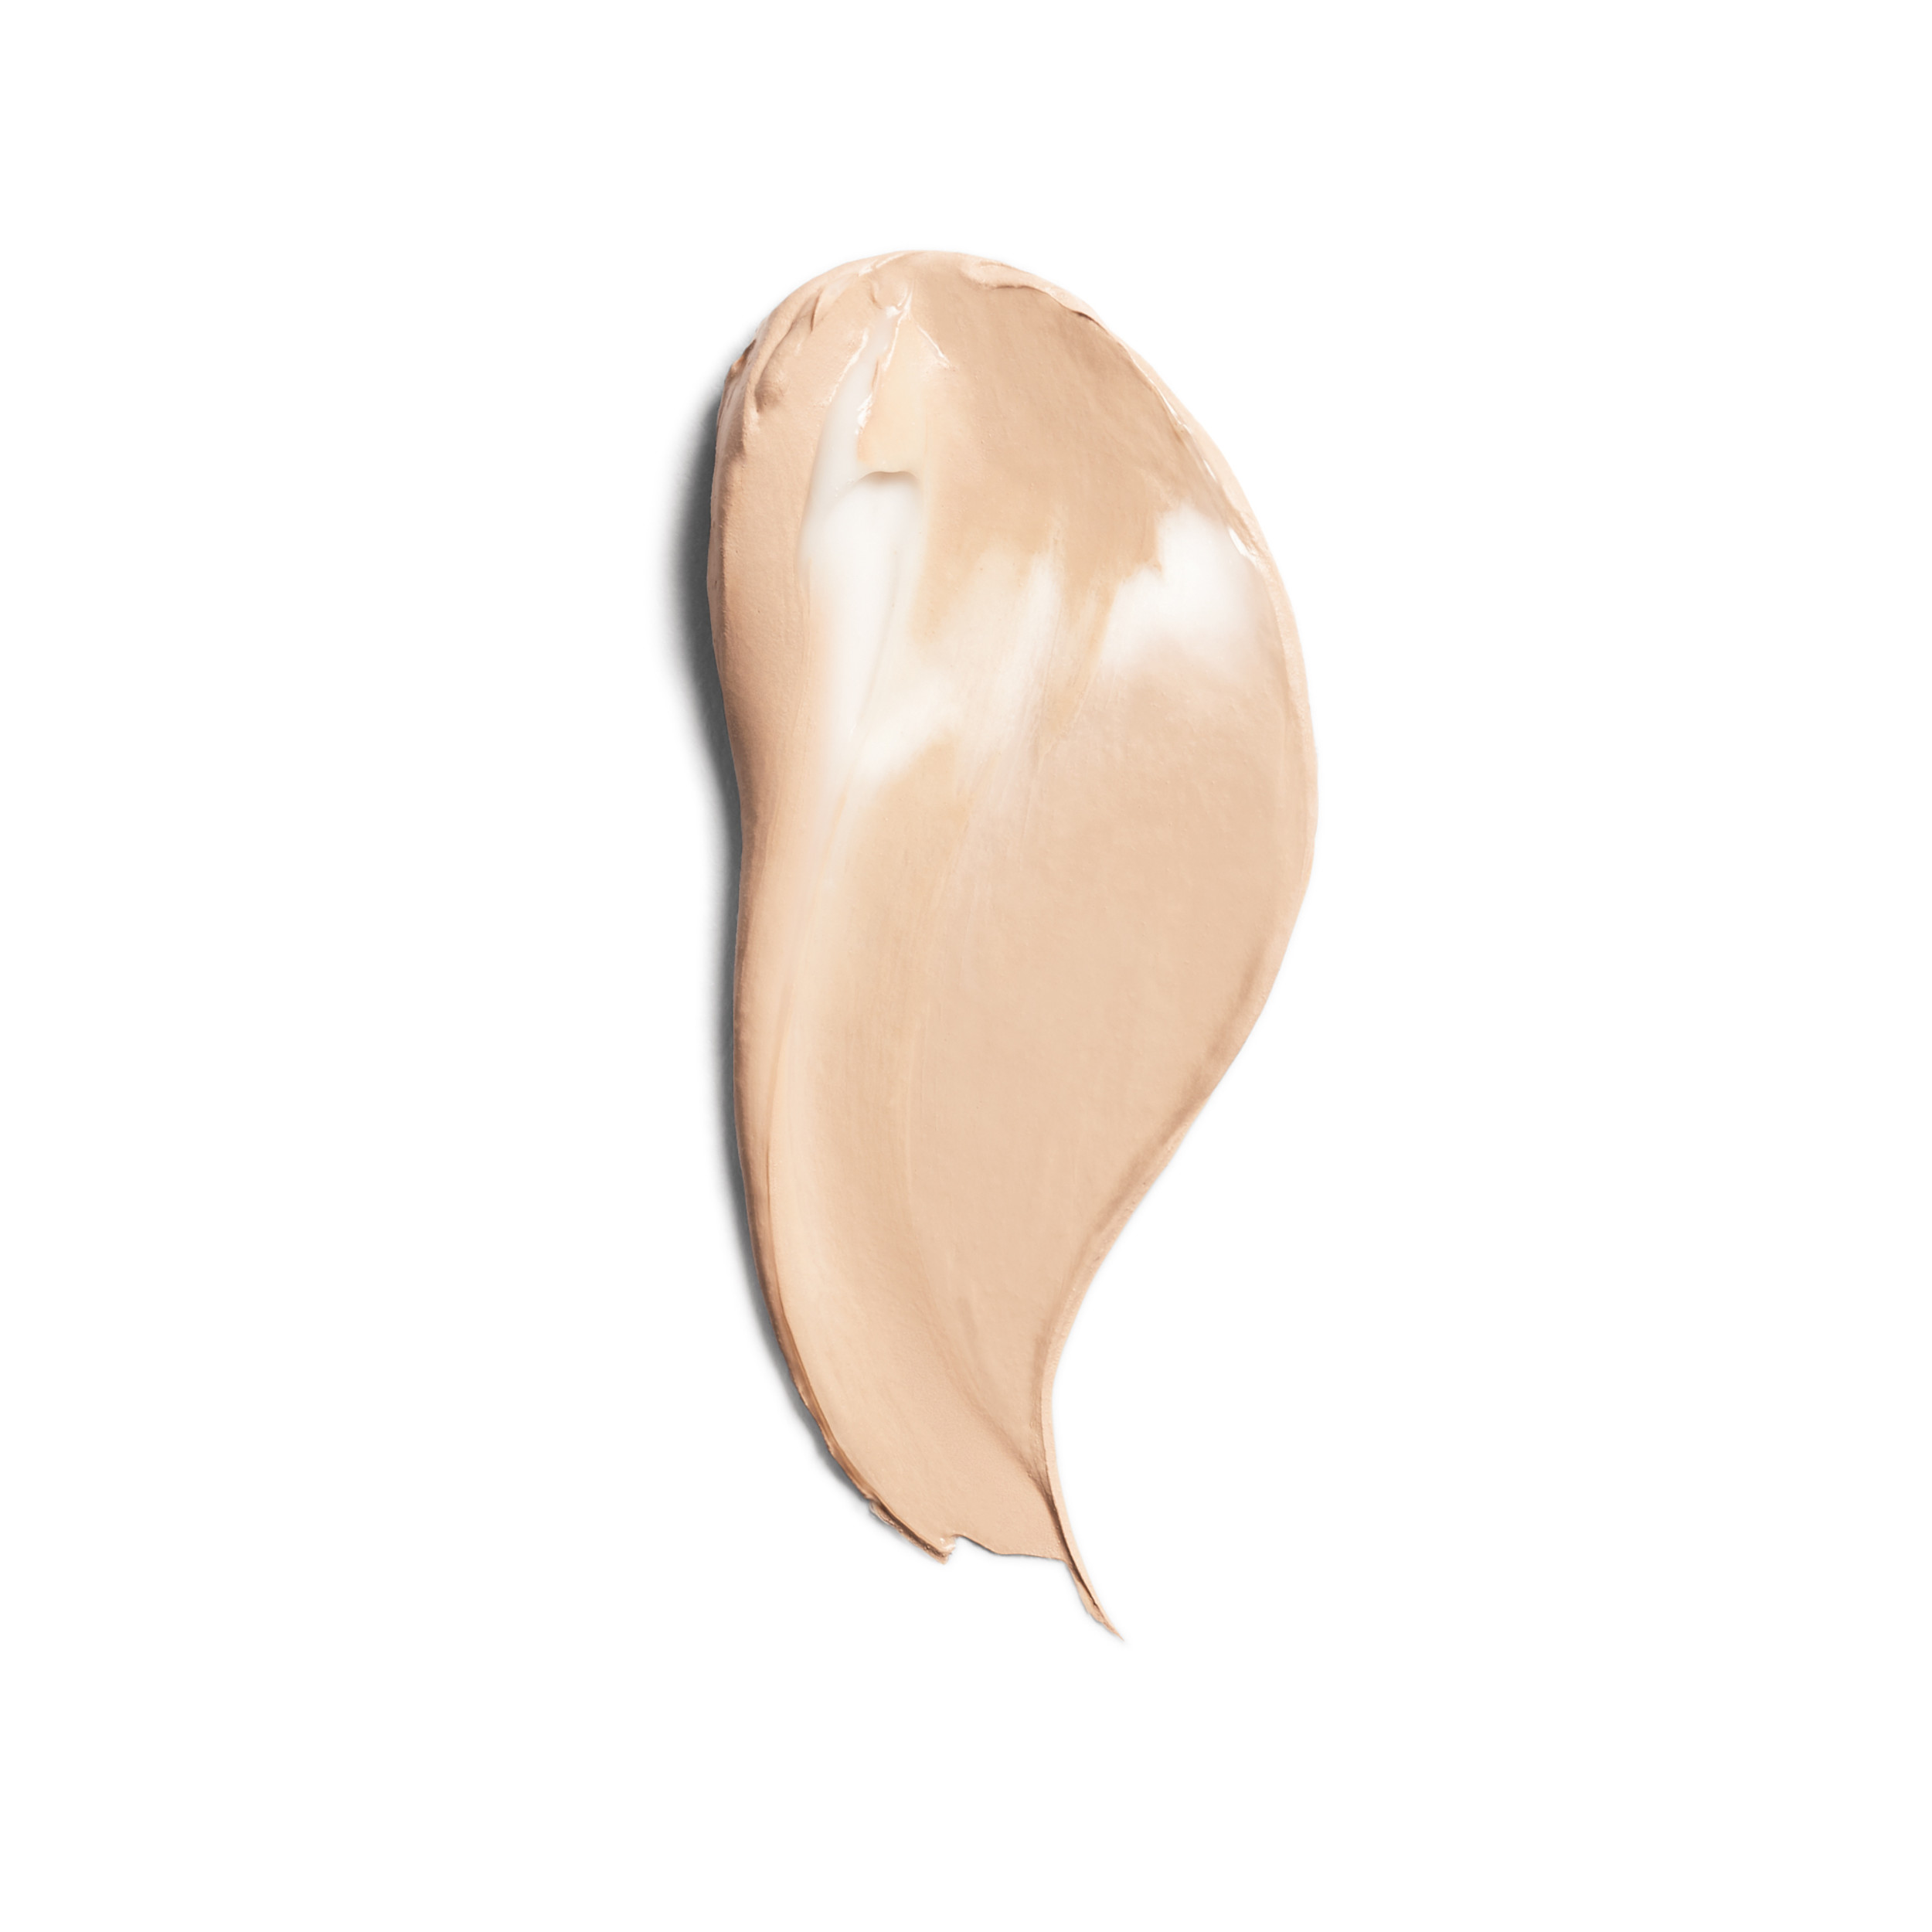 COVERGIRL + OLAY Simply Ageless Instant Wrinkle-Defying Foundation with SPF 28, Creamy Natural, 0.44 oz - image 3 of 9